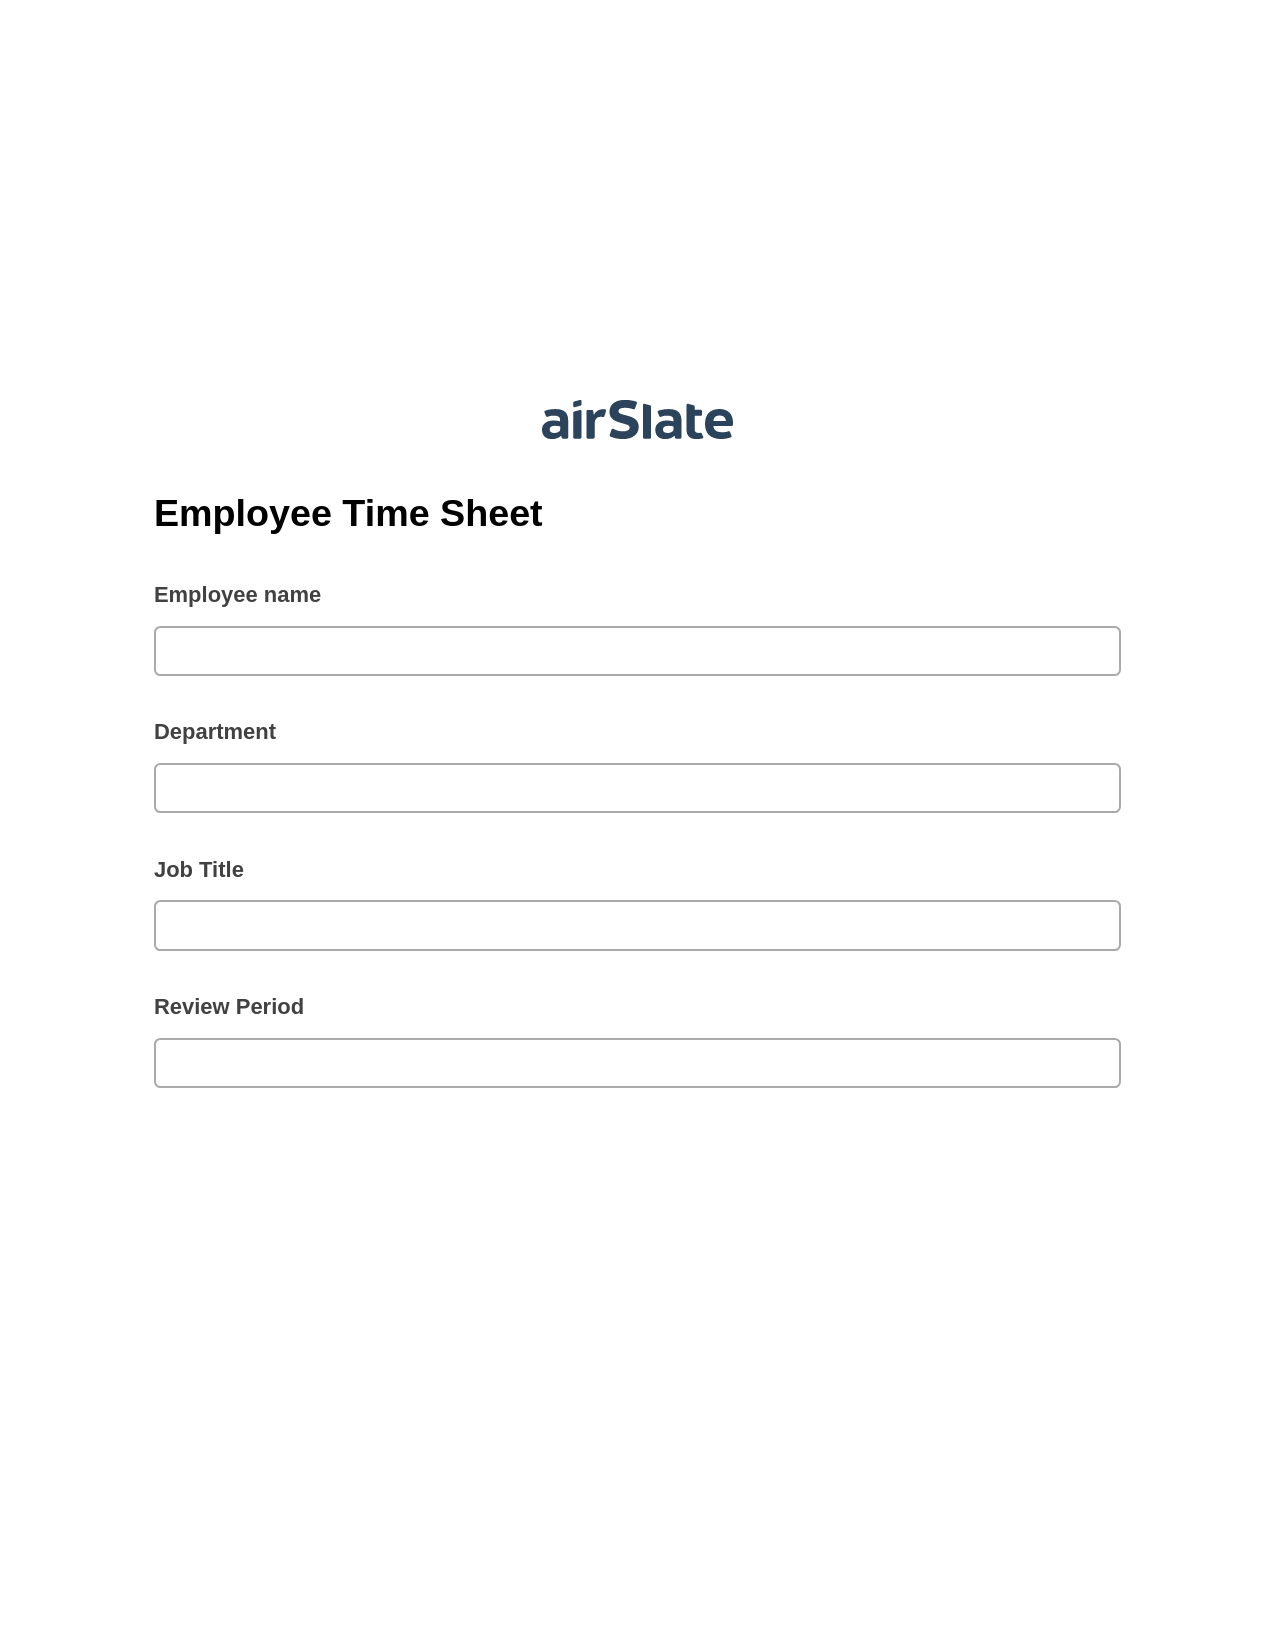 Multirole Employee Time Sheet Prefill from NetSuite records, Update Audit Trail Bot, Text Message Notification Postfinish Bot